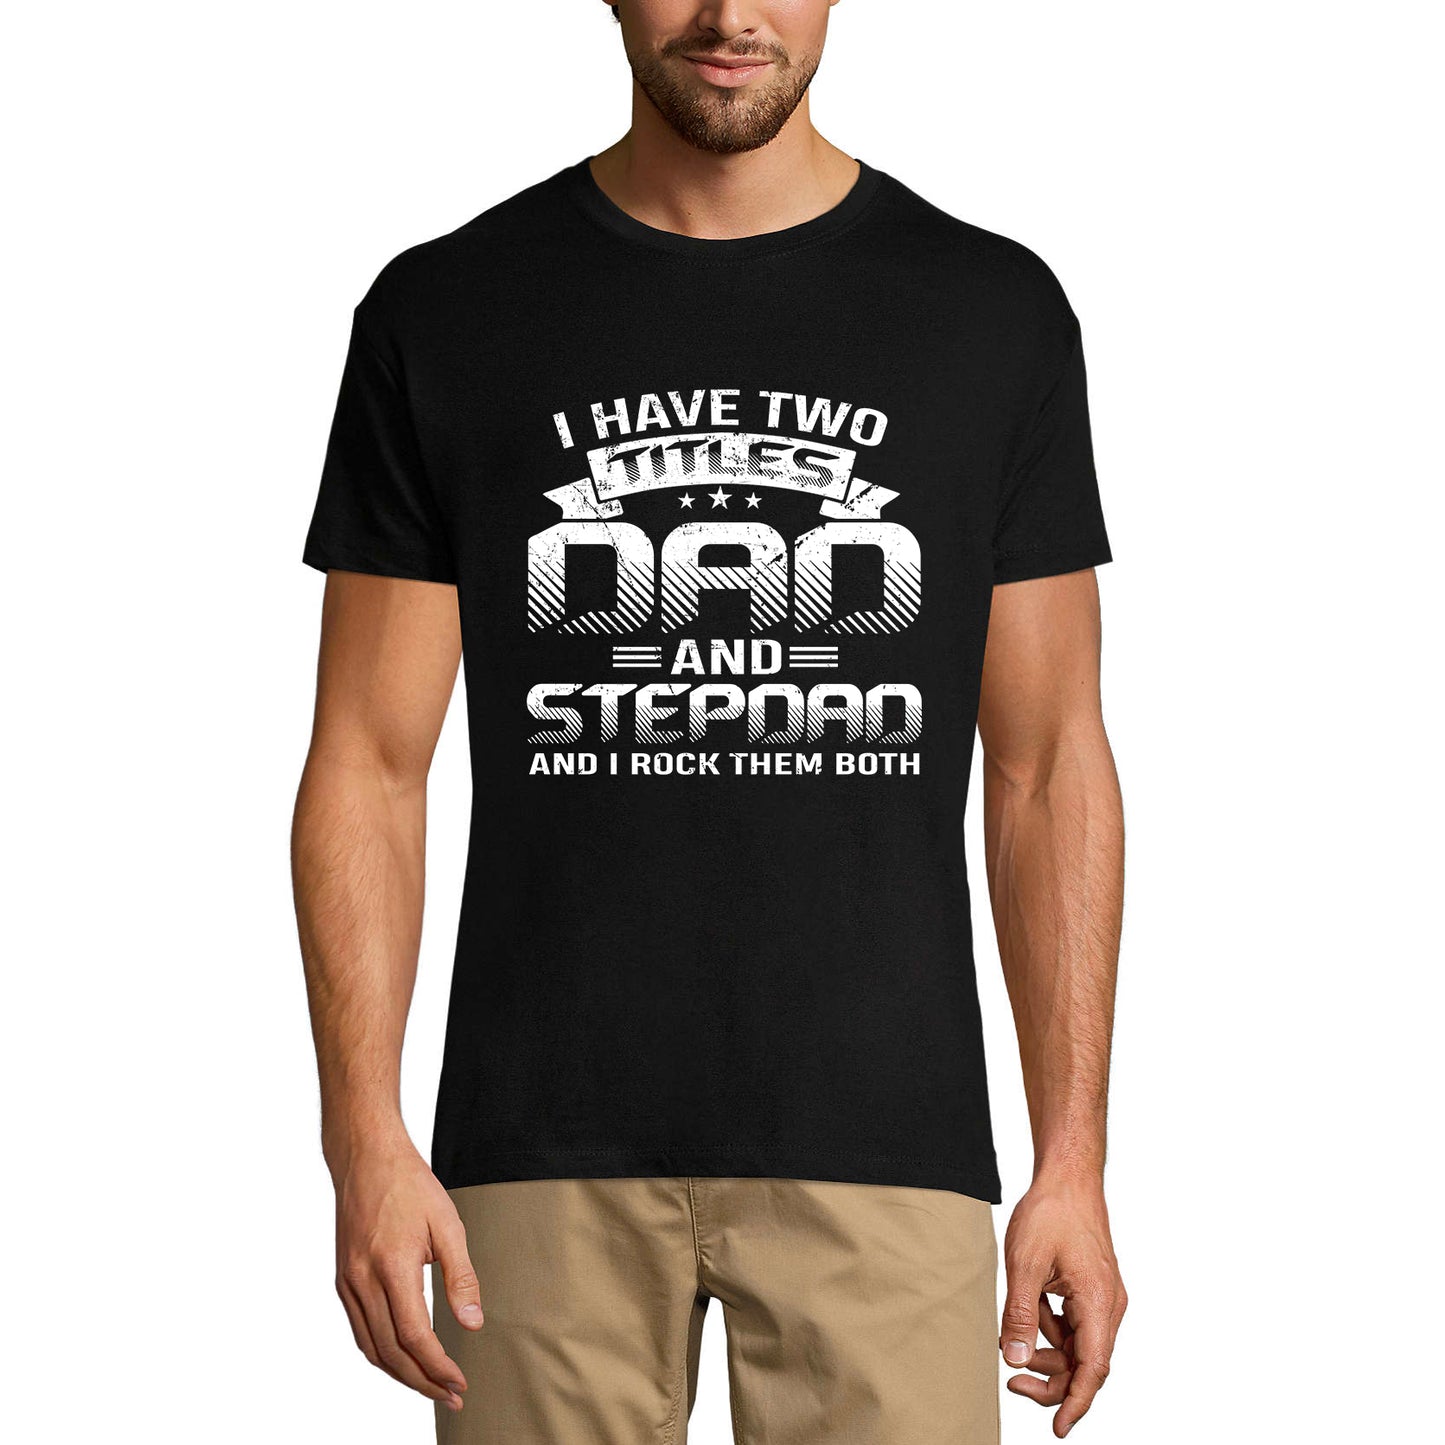 ULTRABASIC Men's Graphic T-Shirt I Have Two Titles Dad and Stepdad - I Rock Them Both